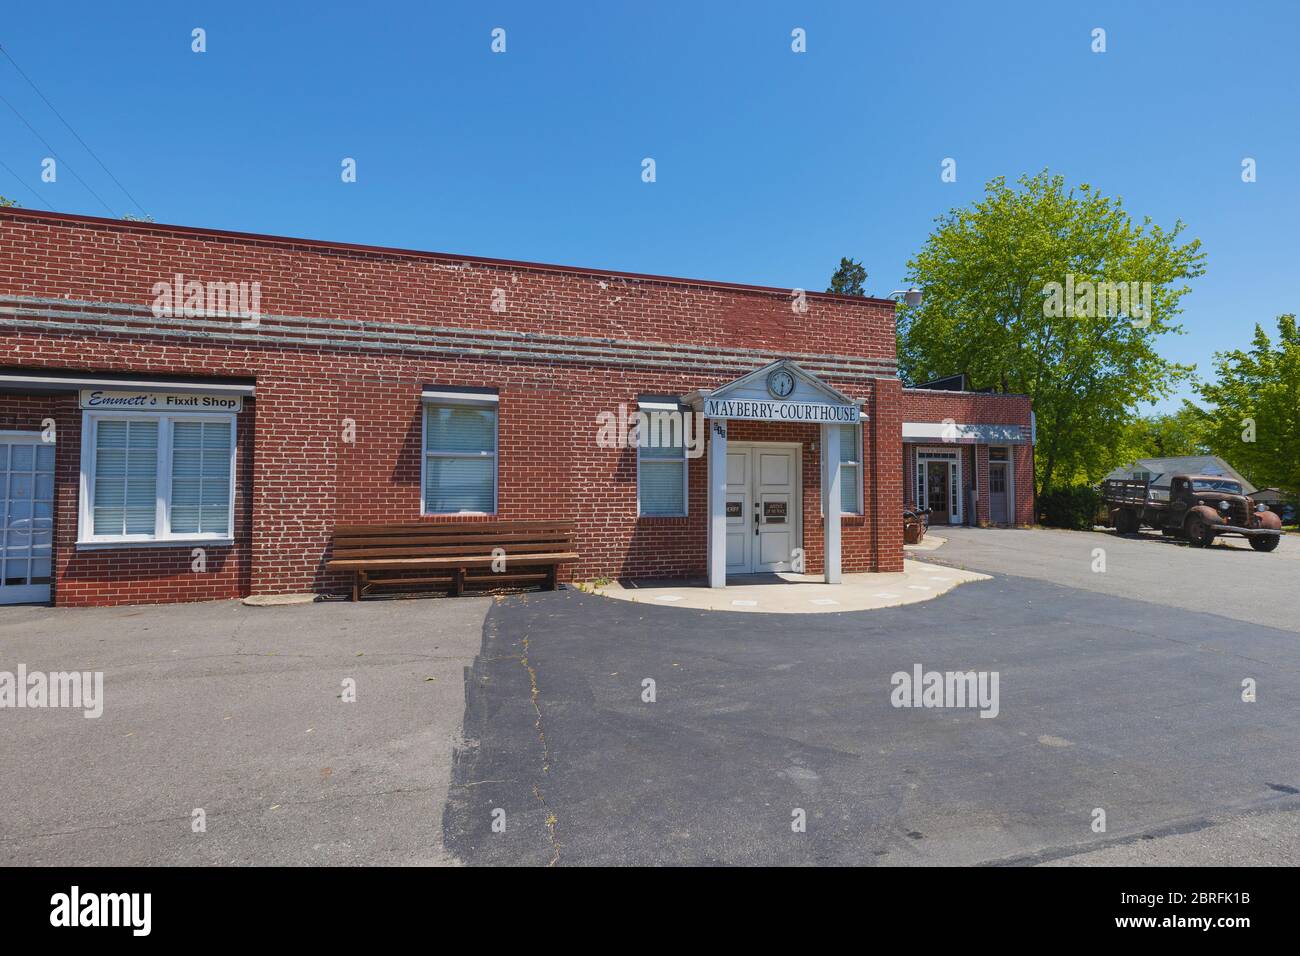 Mount Airy, North Carolina, USA - May 10, 2020: Mayberry, located in ...